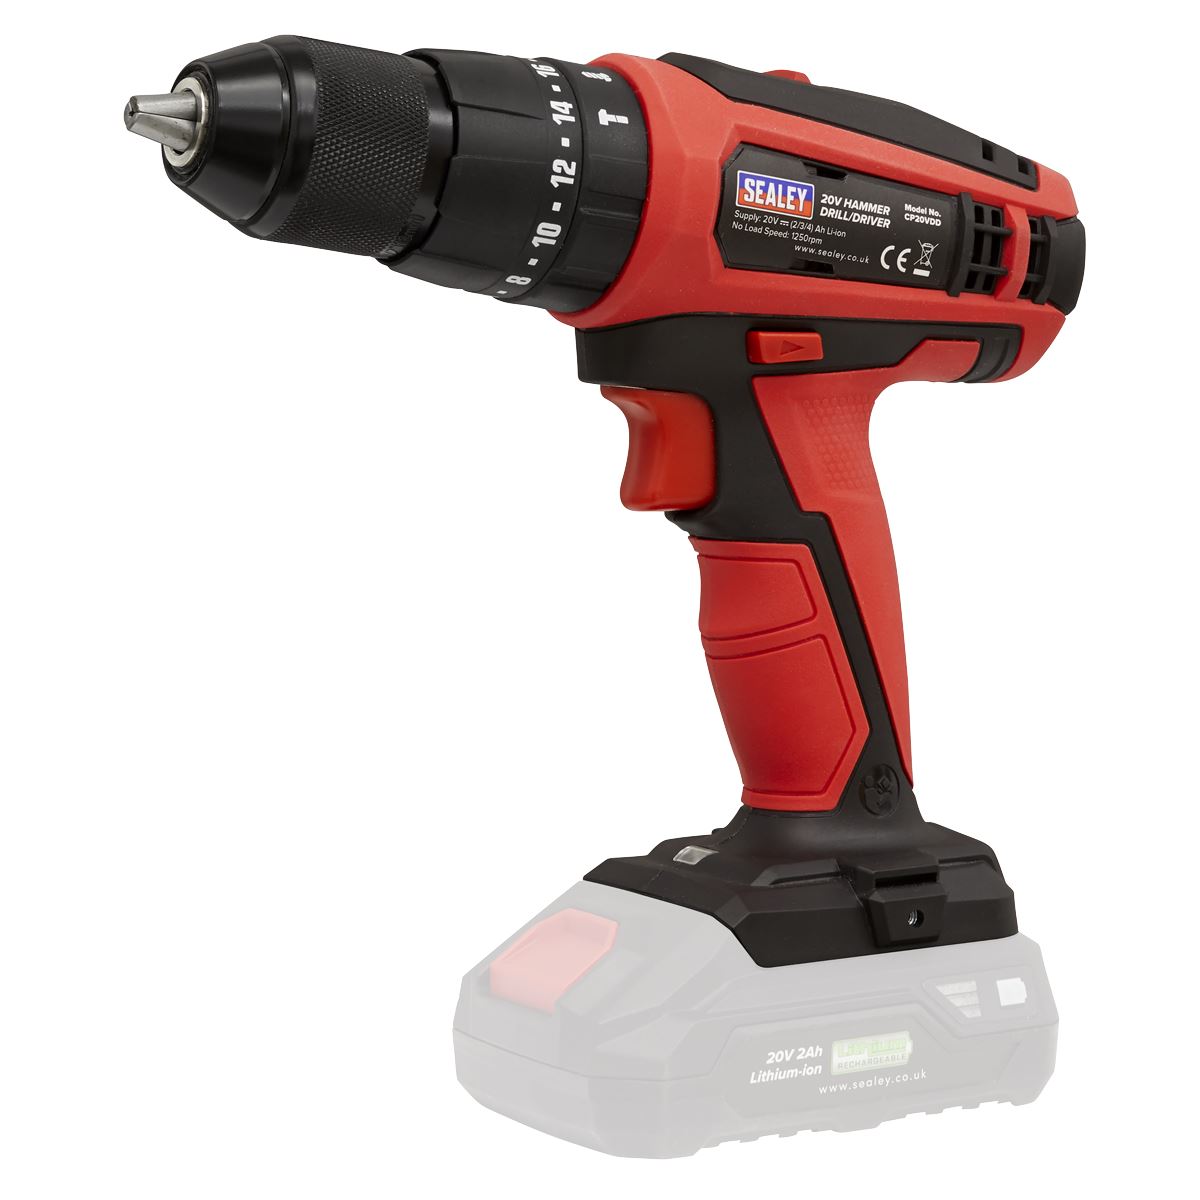 Sealey 2 x 20V SV20 Series Cordless Router & Combi Drill Kit - 2 Batteries